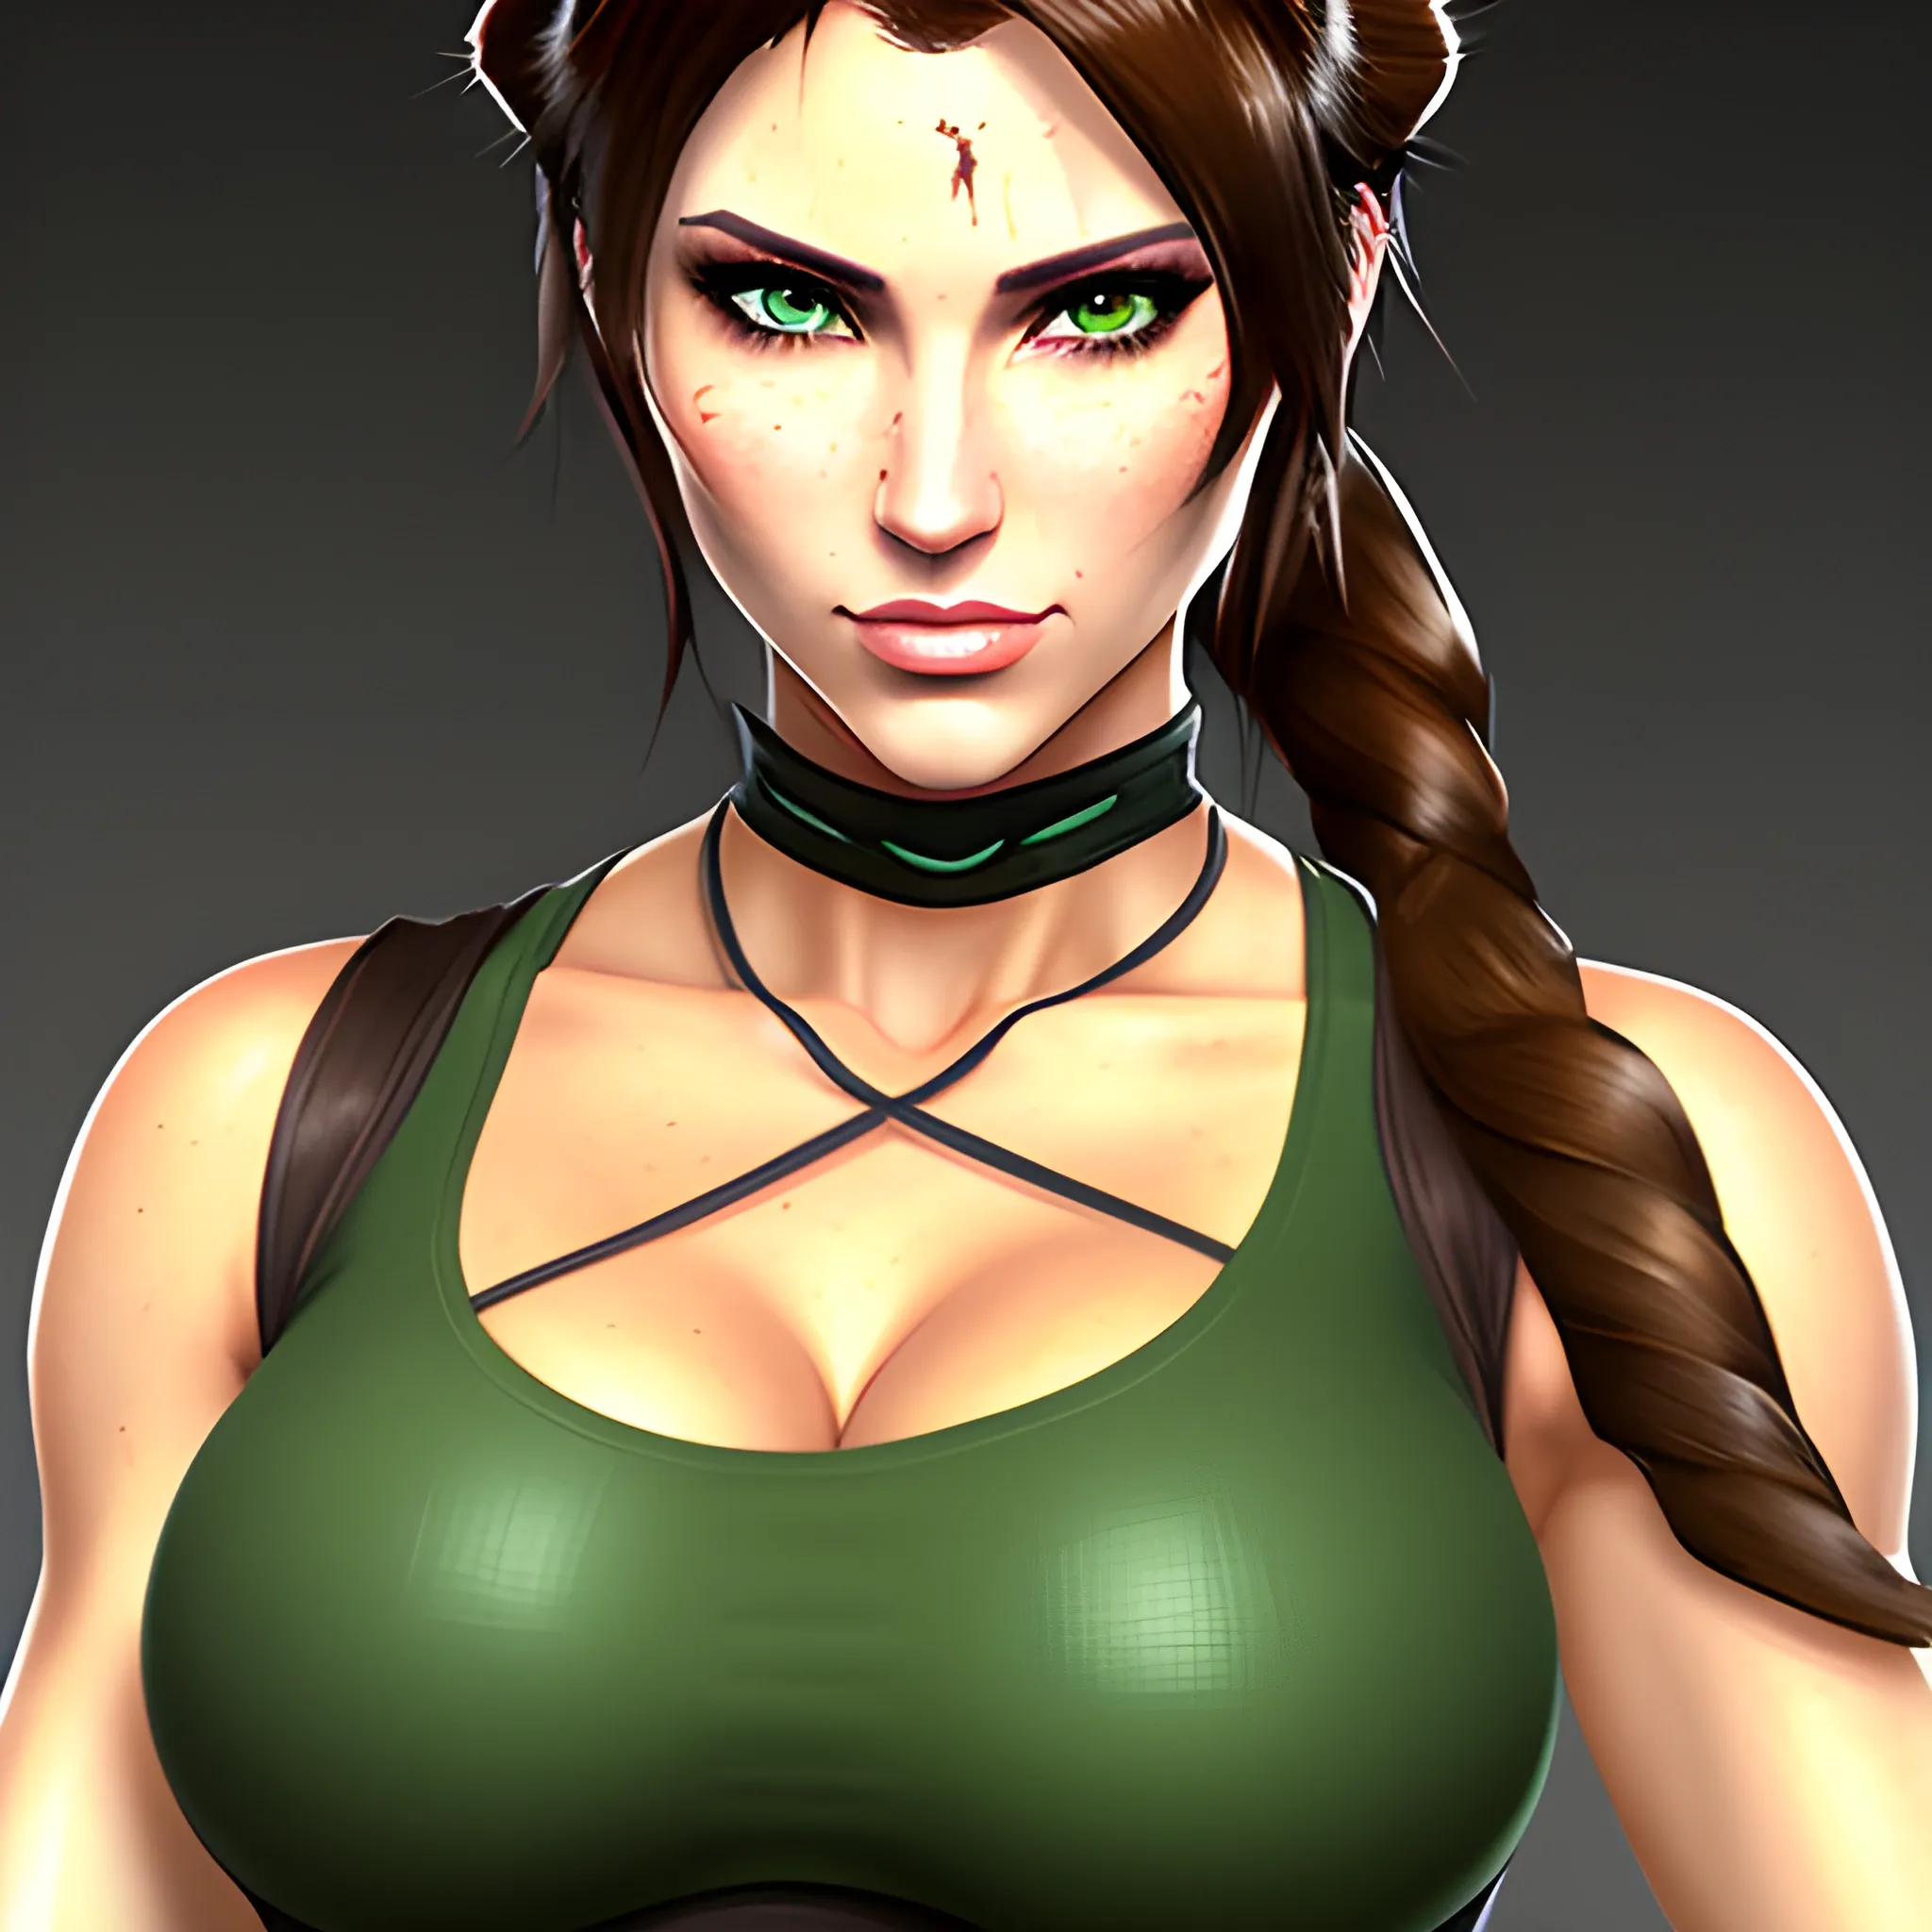 In the style of Anime, (masterpiece), (portrait photography), (portrait of an adult Caucasian female), cat ears, cargirl, Lara Croft from Rise of the Tomb Raider, bun hairstyle, large bun hairstyle, green eyes, white tanktop, exposed midriff